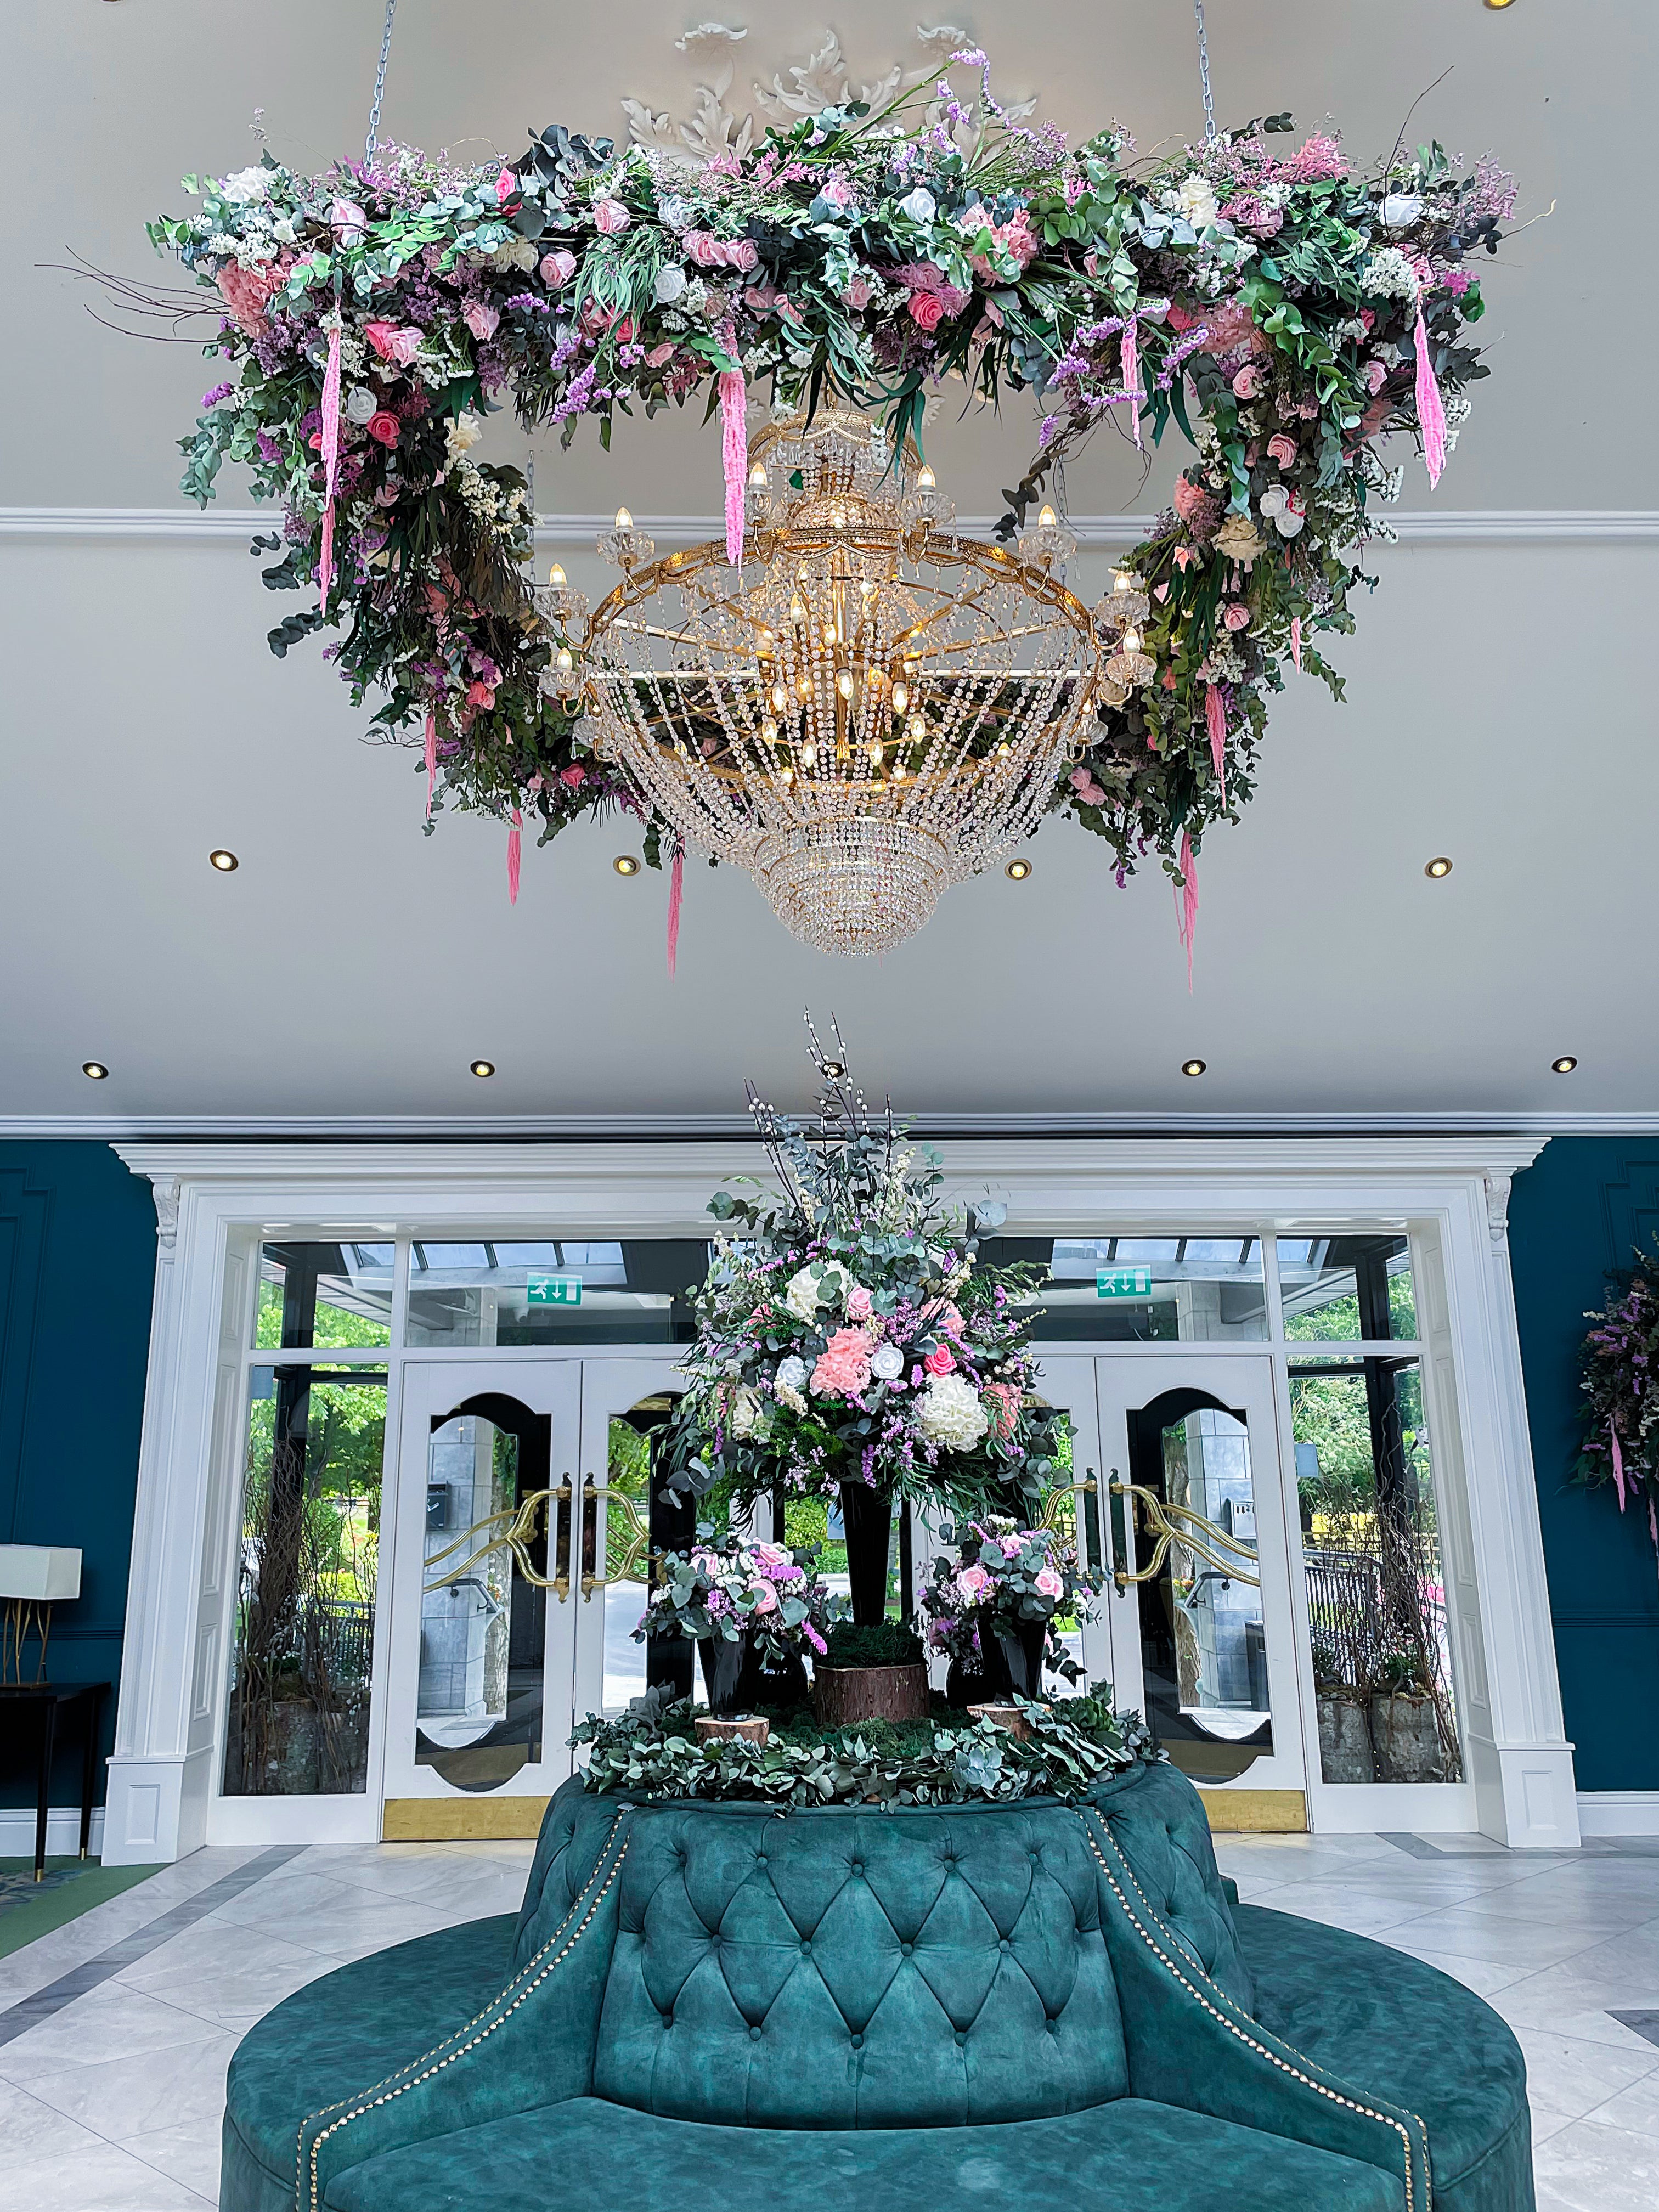 A luxurious floral installation cascades from an ornate chandelier in the lobby of Fitzgerald Woodlands House Hotel & Spa in Ireland, featuring a bespoke floral installation with various flowers in shades of pink, lavender, and cream amid lush greenery. This elaborate display hangs above a rich teal, tufted circular couch, contributing to the warm and welcoming atmosphere of the hotel.